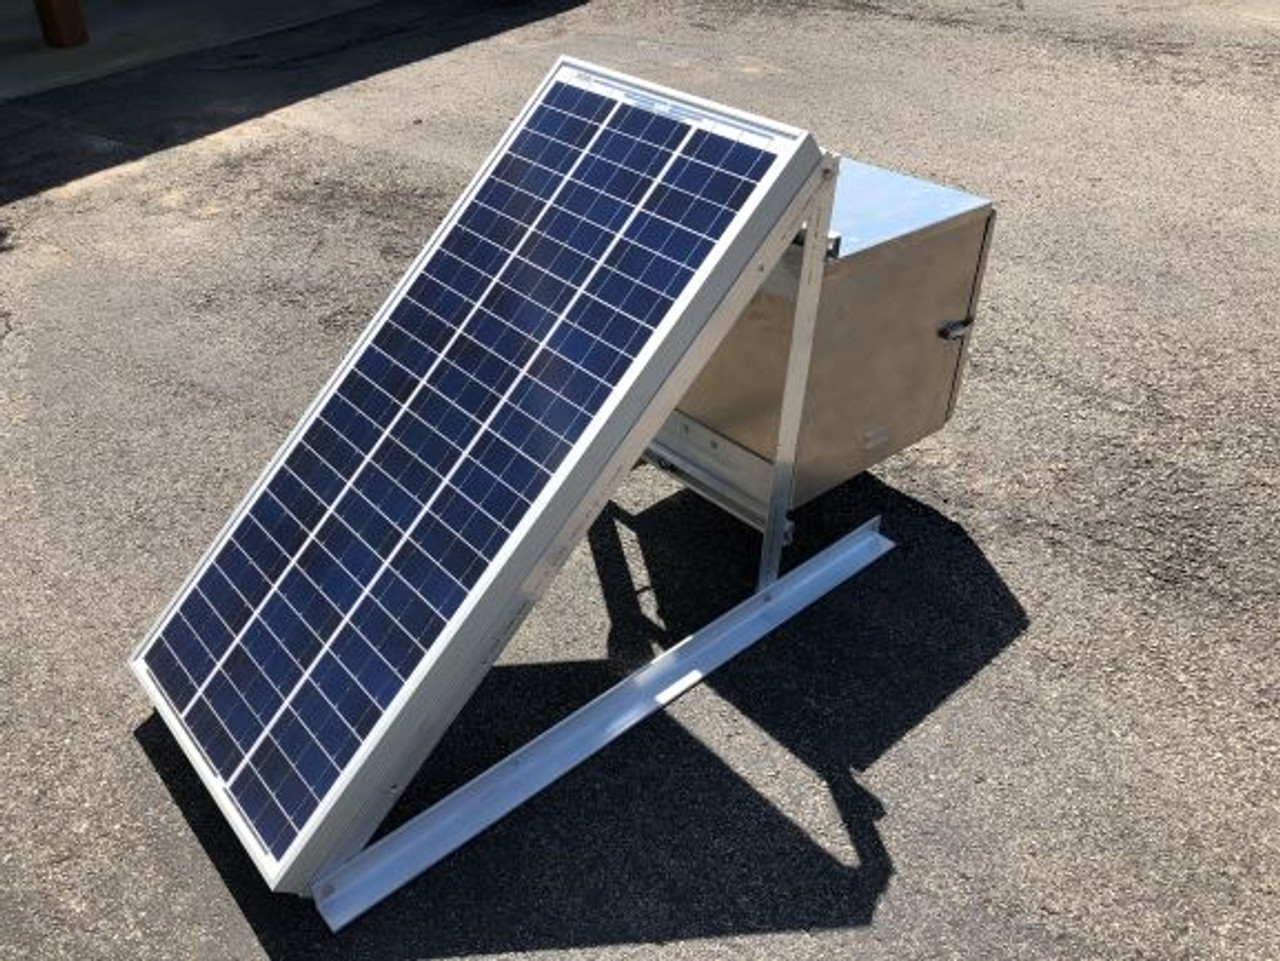 Factory assembled aluminum ground (skid) mount Solar panel, frame, Battery/control box. Tapped with strain relief fittings to connect the StarGazer(s) for easy cable termination at time of installation